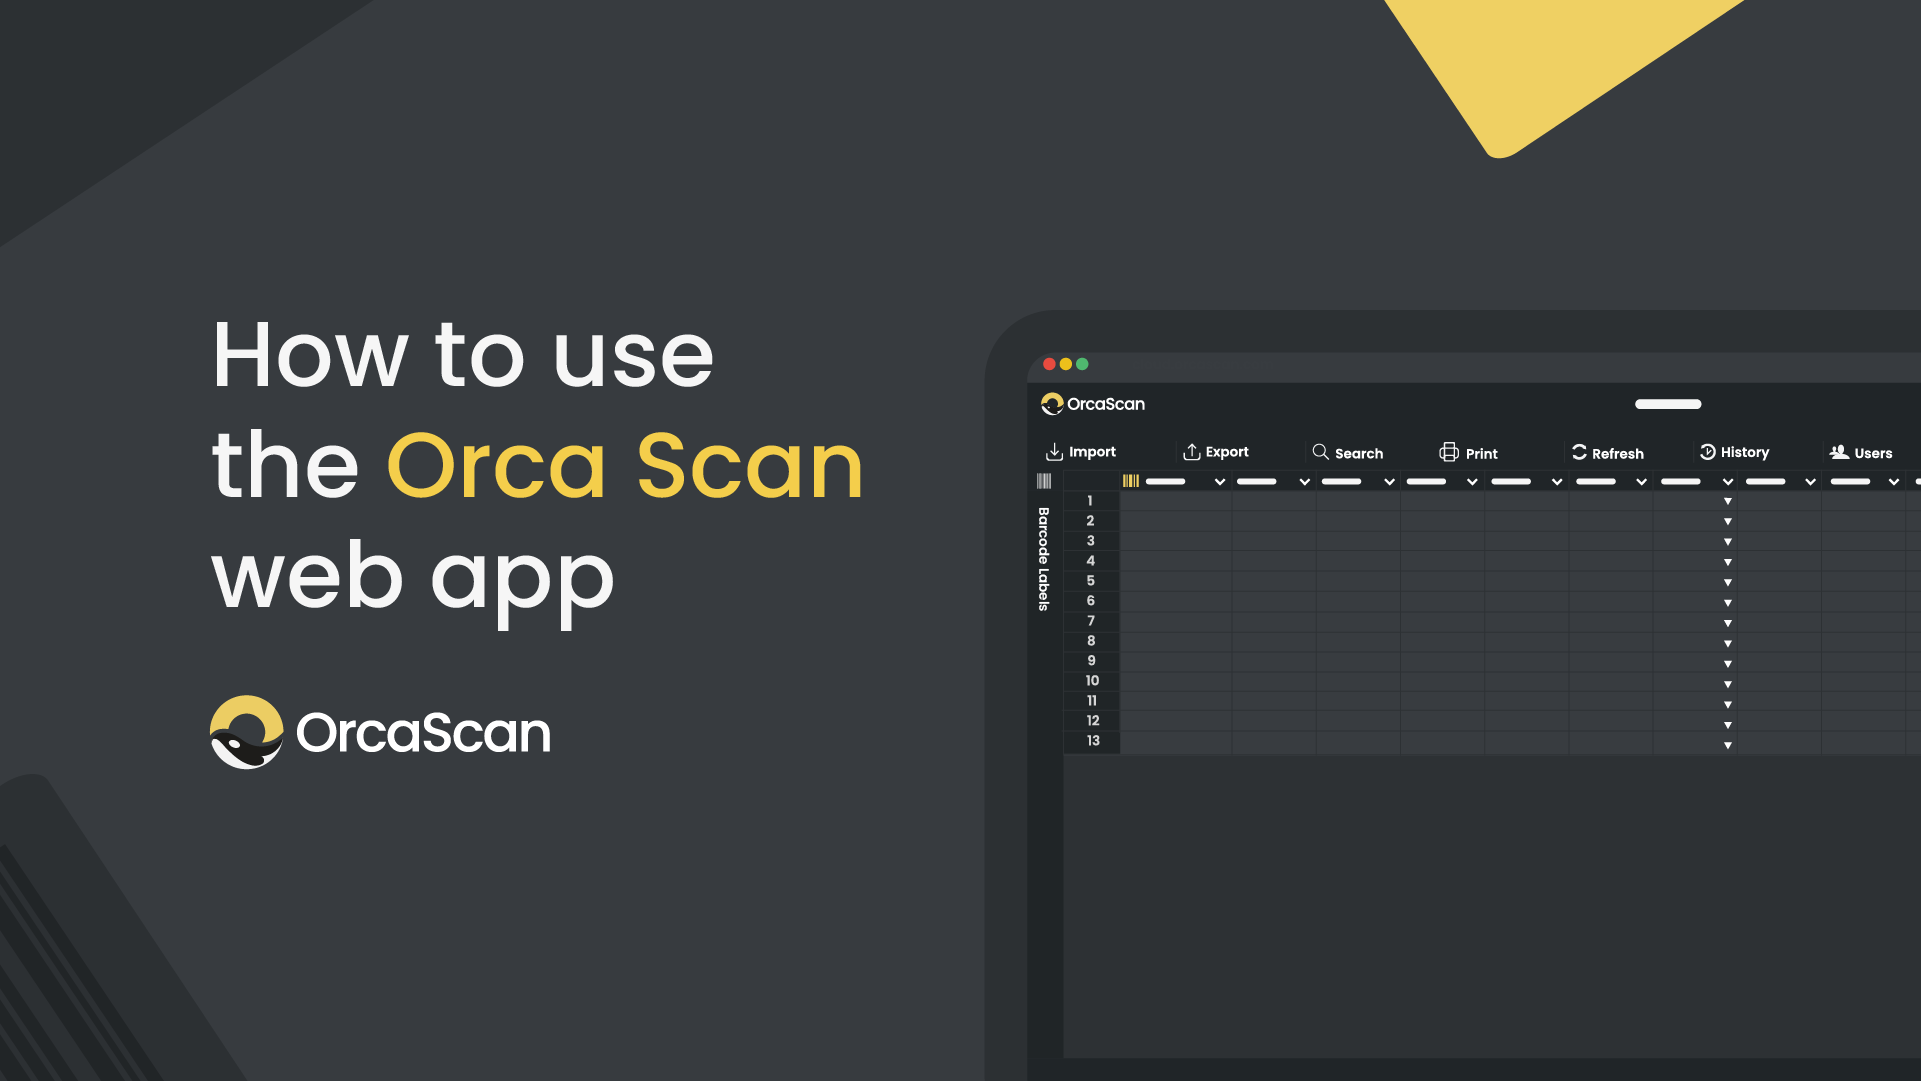 How to use the Orca Scan web app